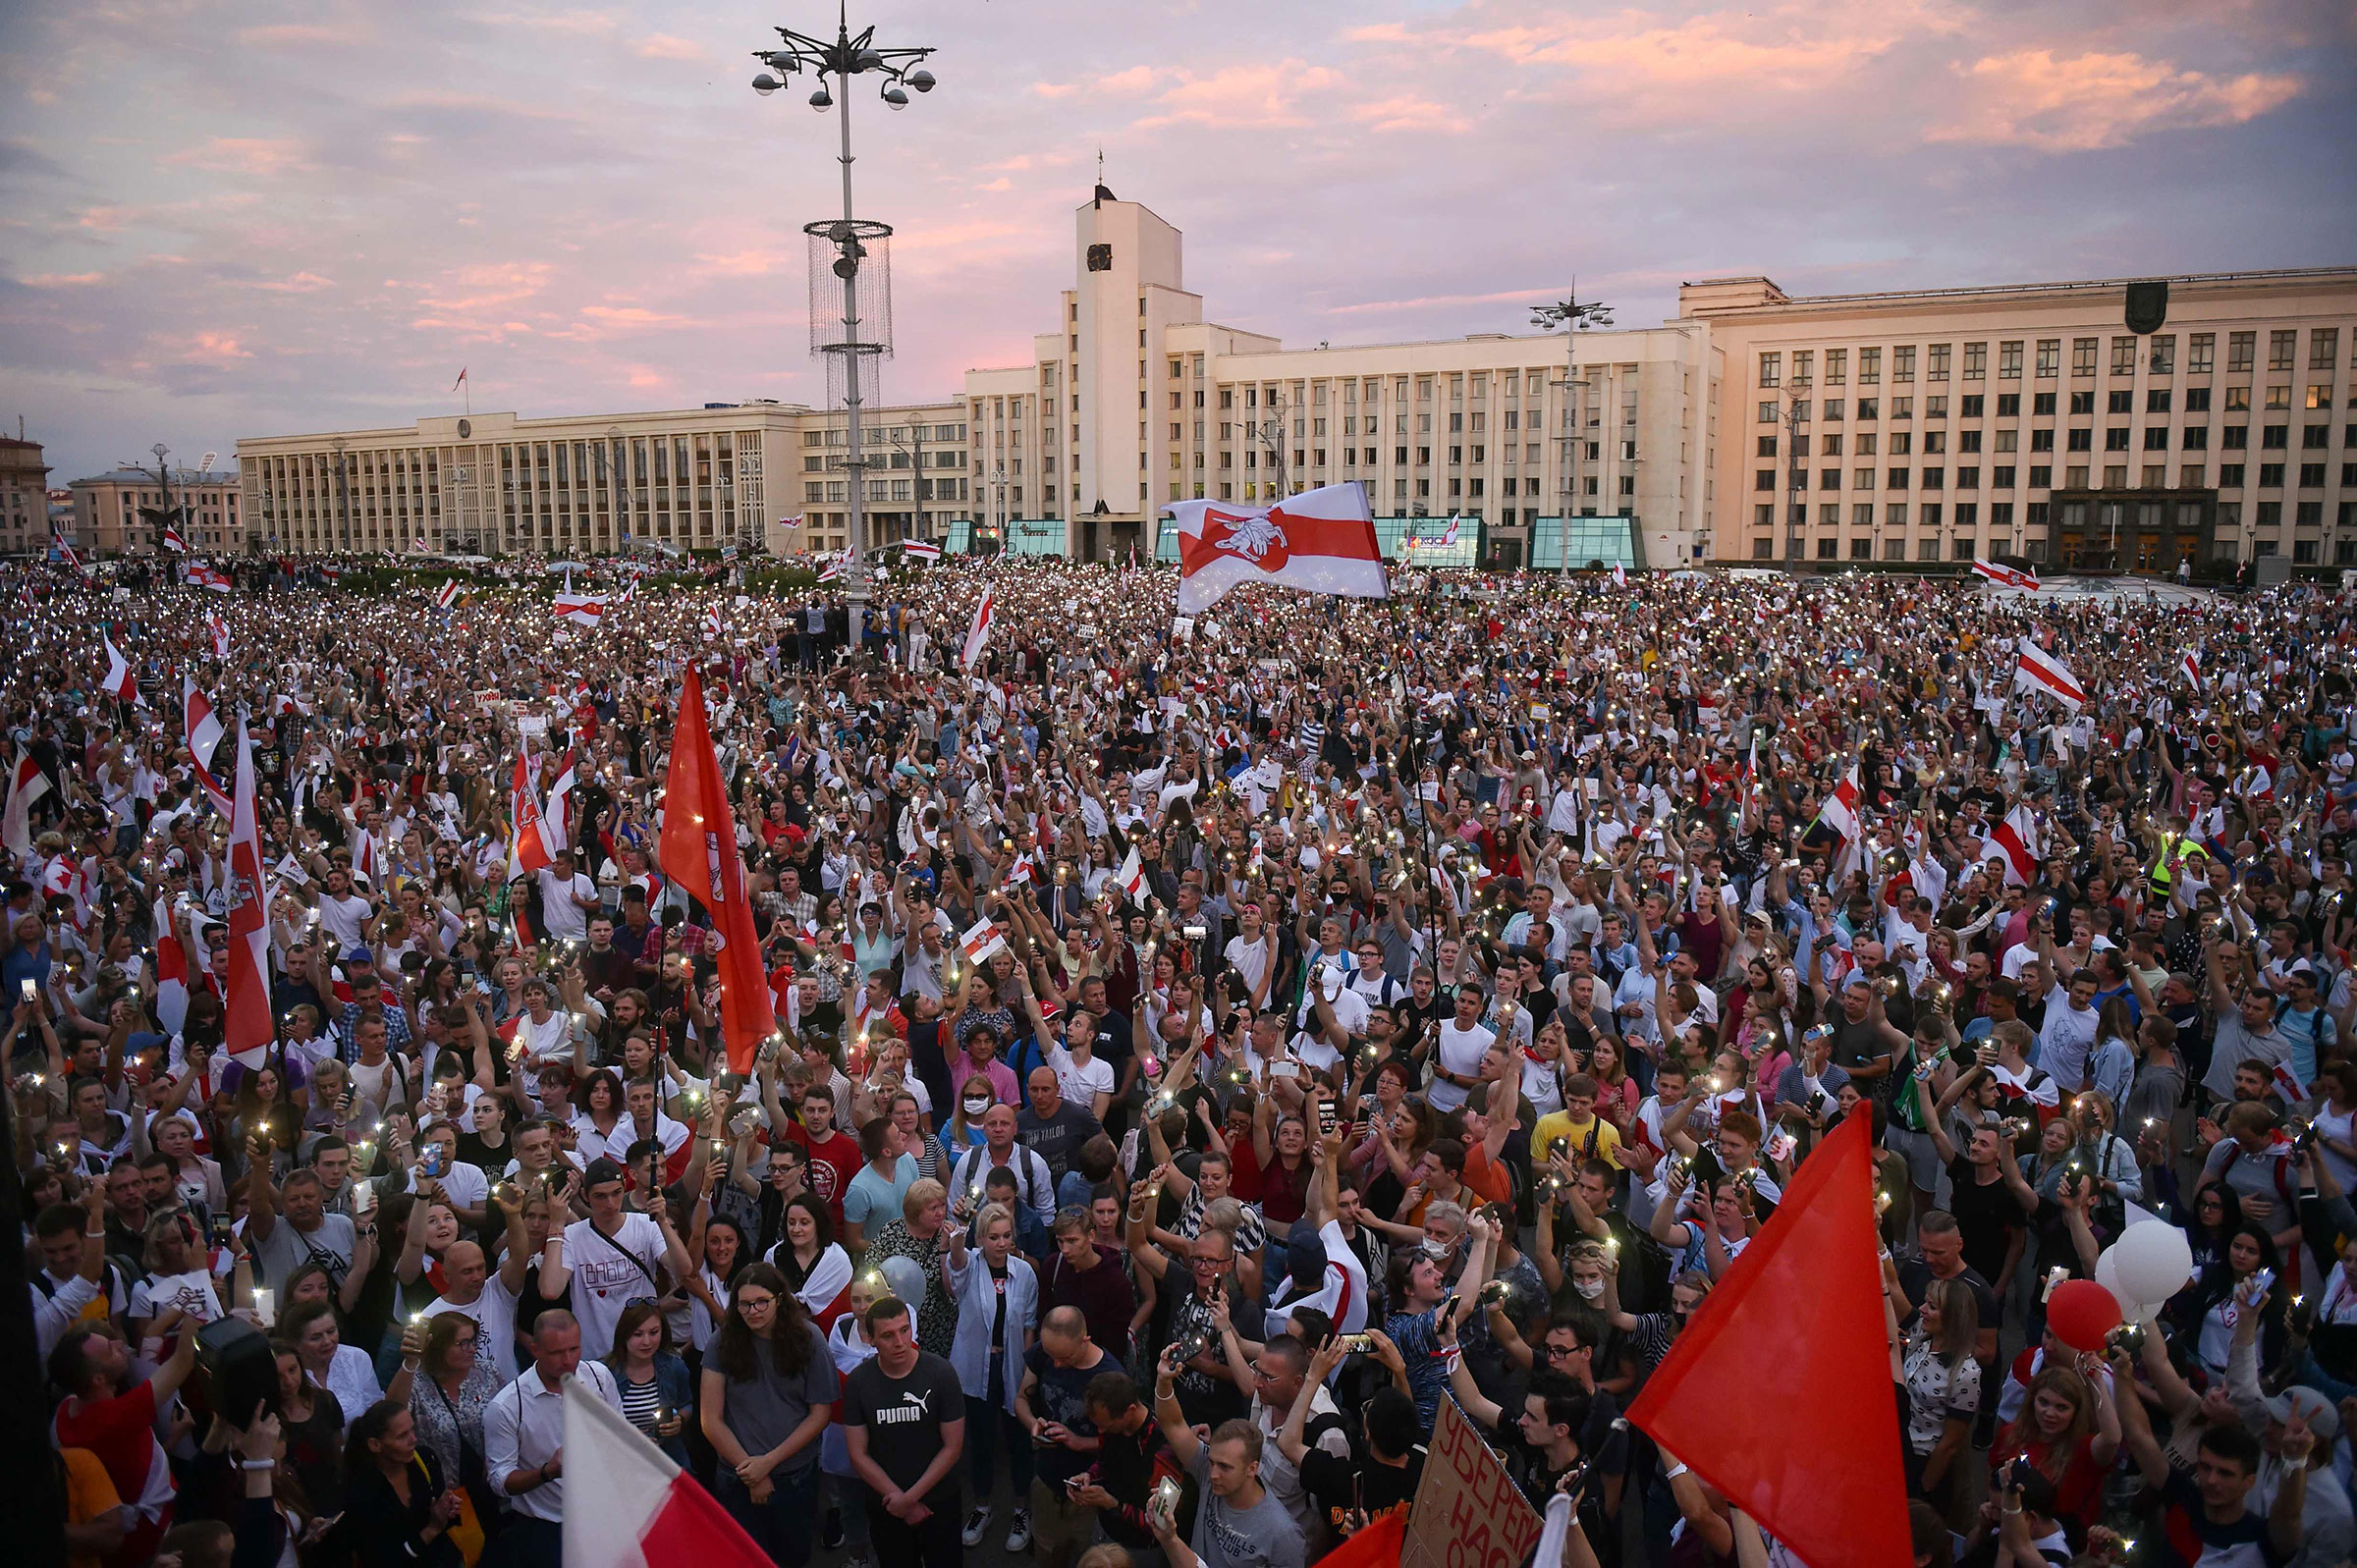 Opposition supporters protest against disputed presidential elections results at Independence Square in Minsk on Aug. 18, 2020. (Sergei Gapon—AFP/Getty Images)